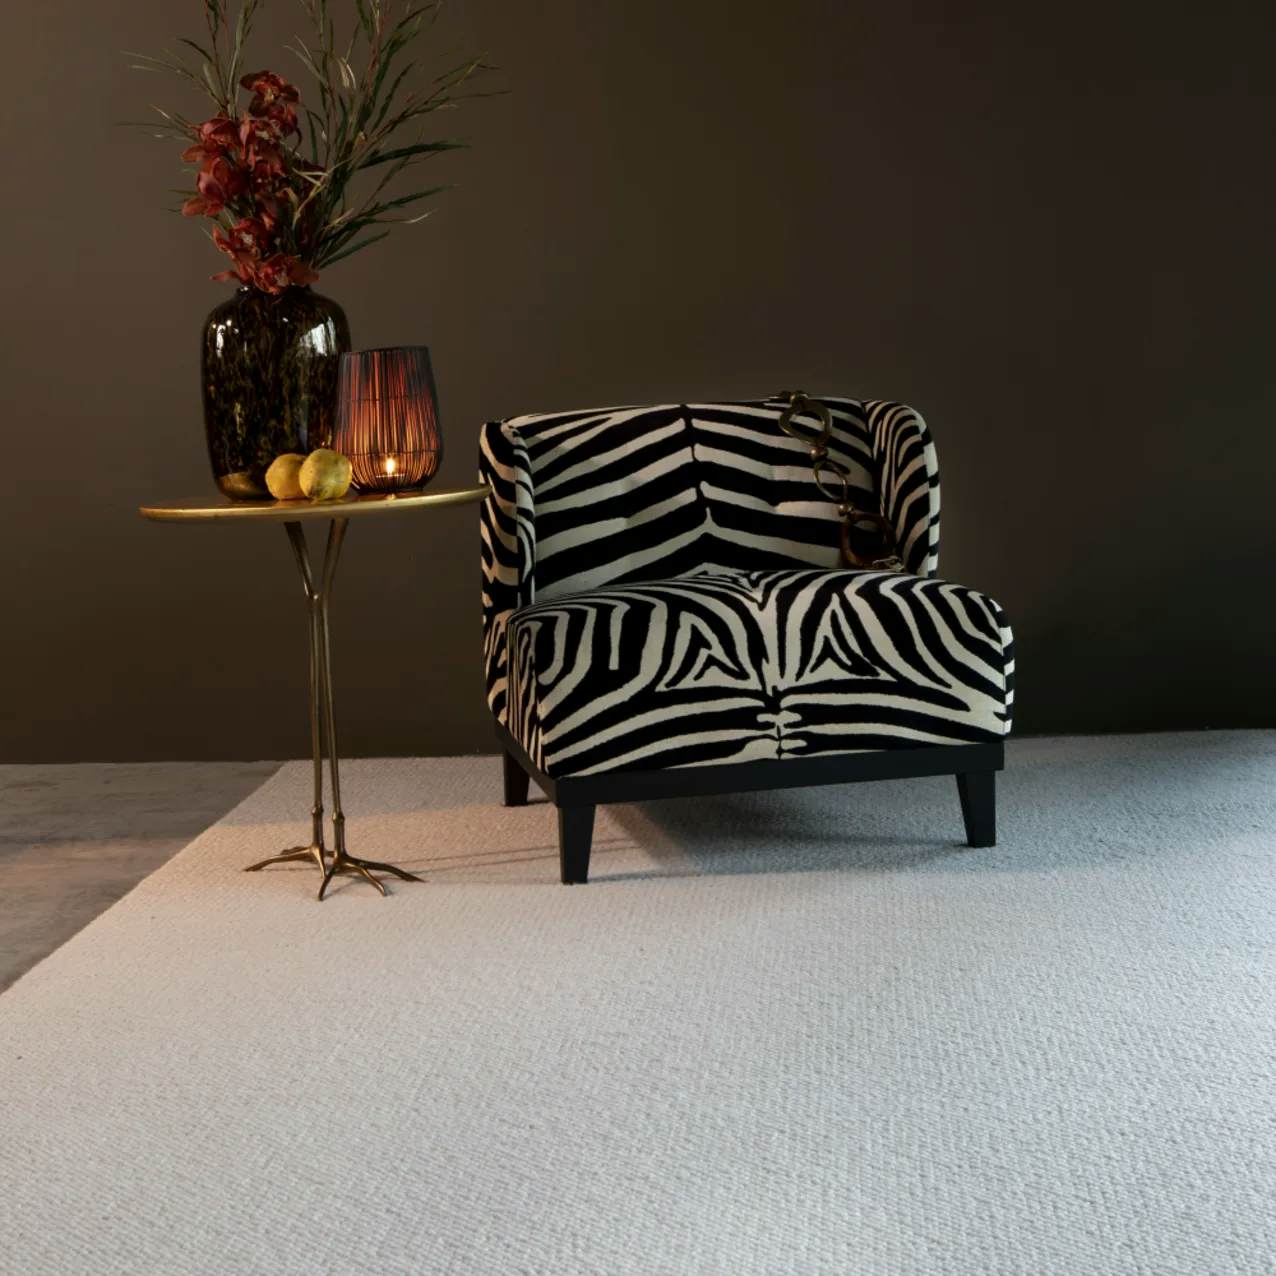 Knot My Style Ivory wool rug in room with zebra print lounge chair